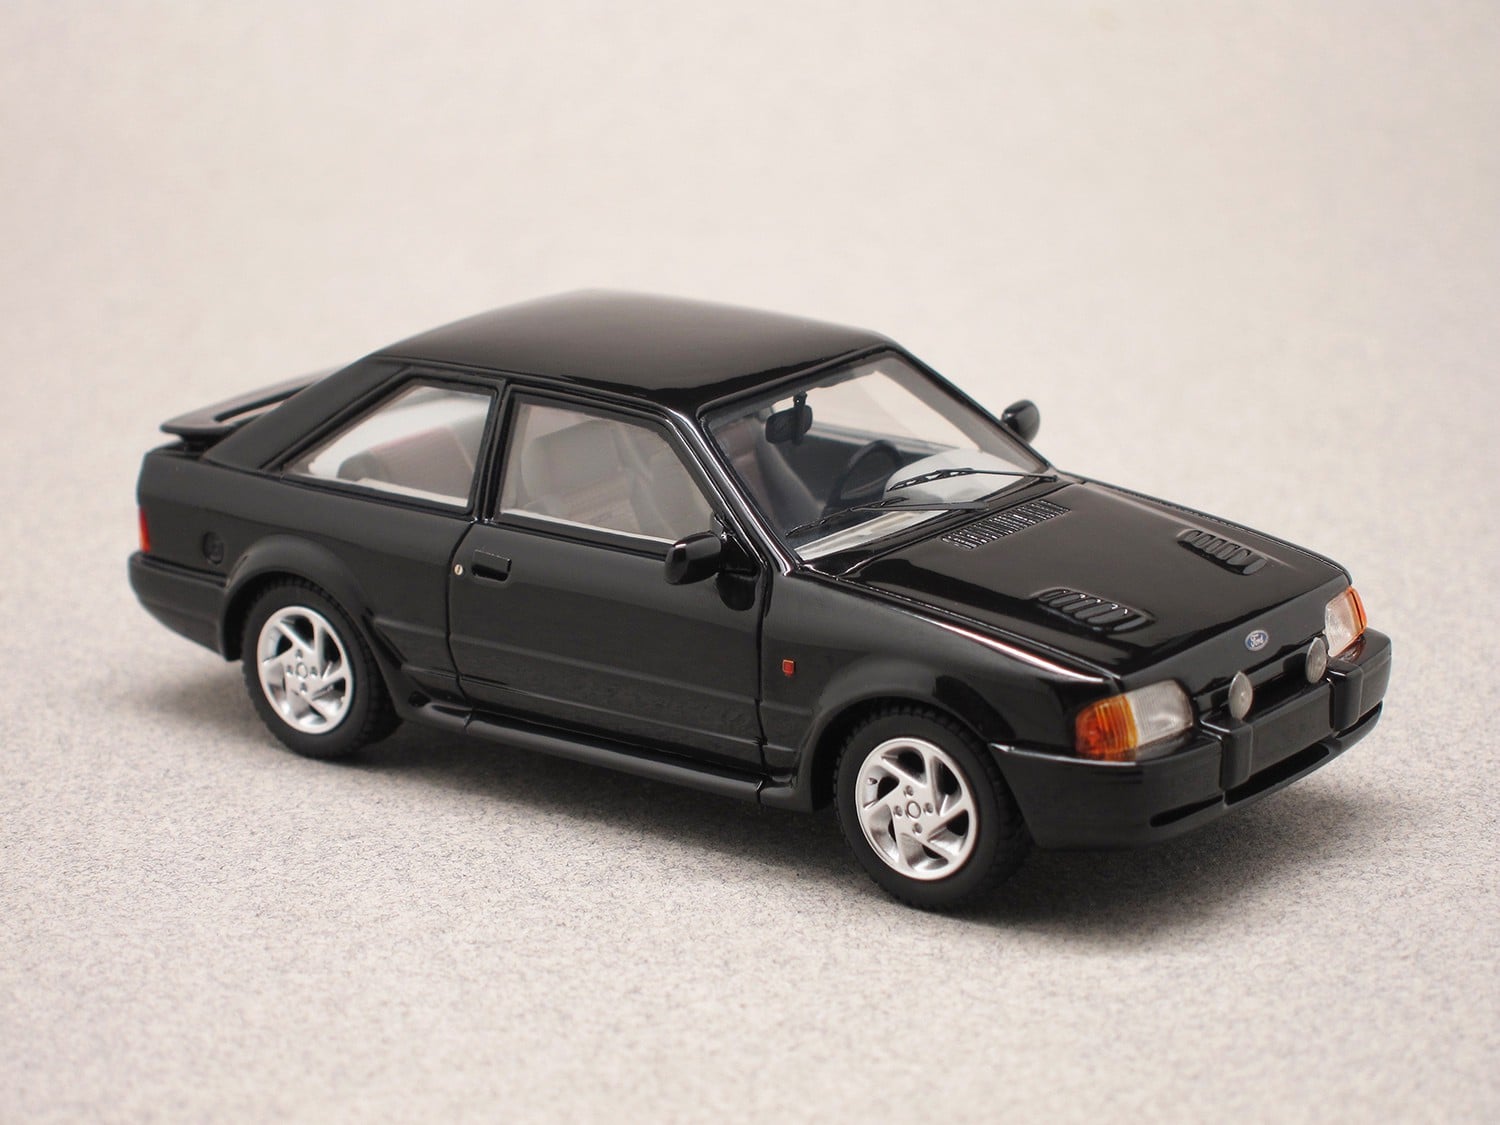 Ford Escort RS Turbo 1986 (NEO) 1:43